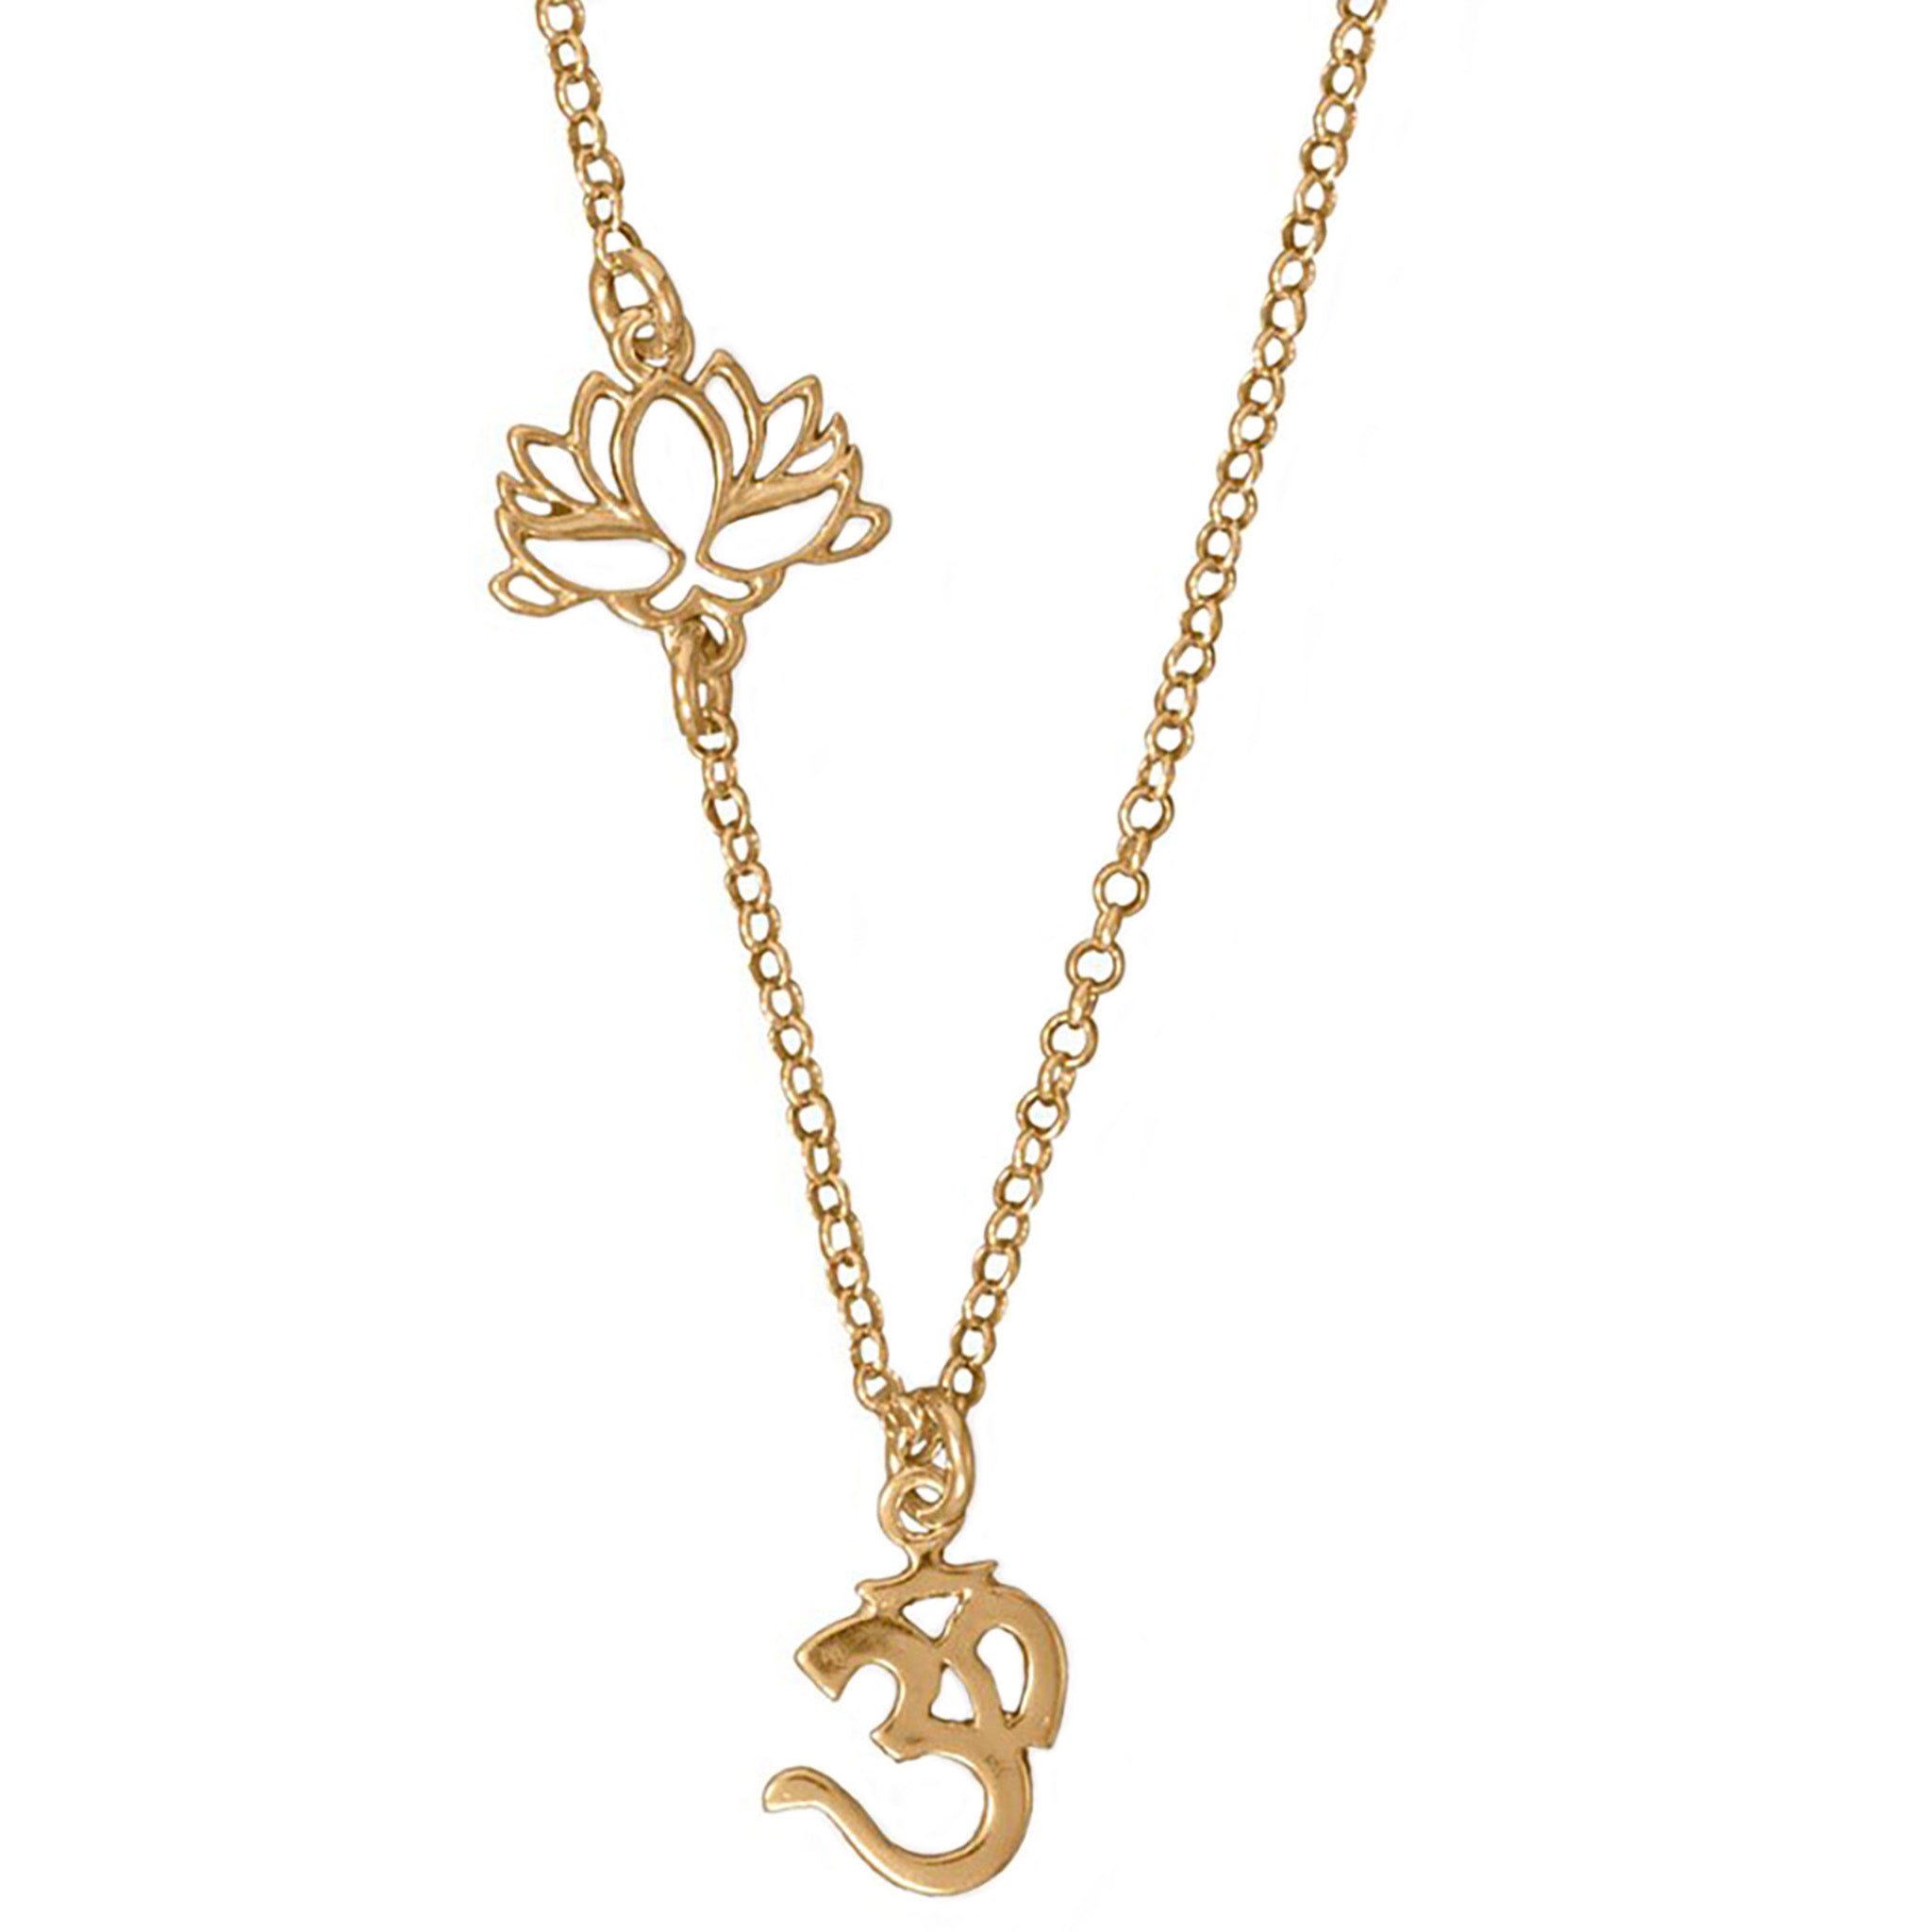 Om Charm and Lotus Flower Necklace